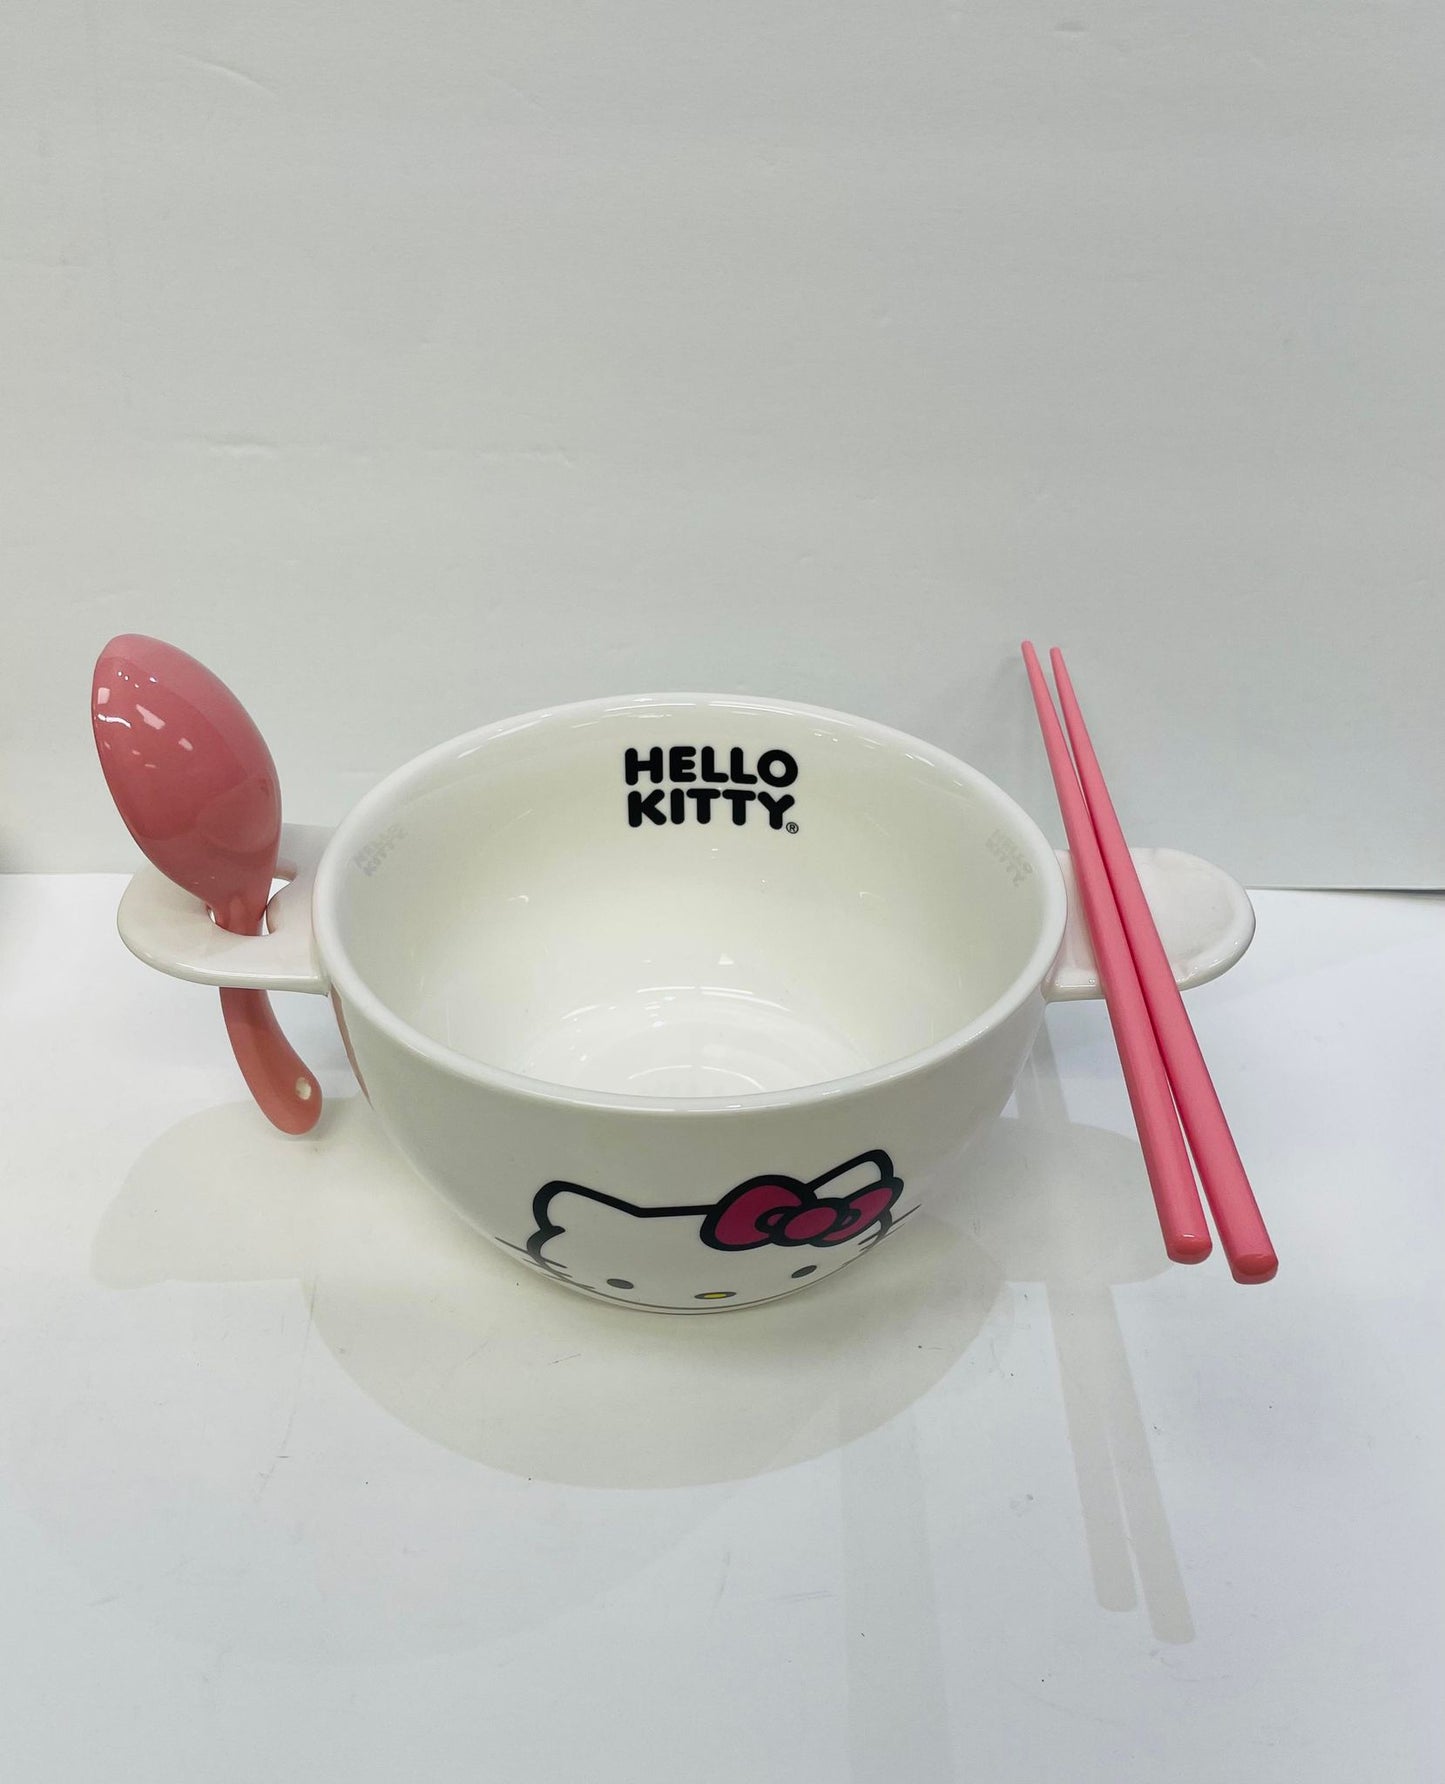 HELLO KITTY RAMEN BOWL WITH CHOPSTICK AND SPOON